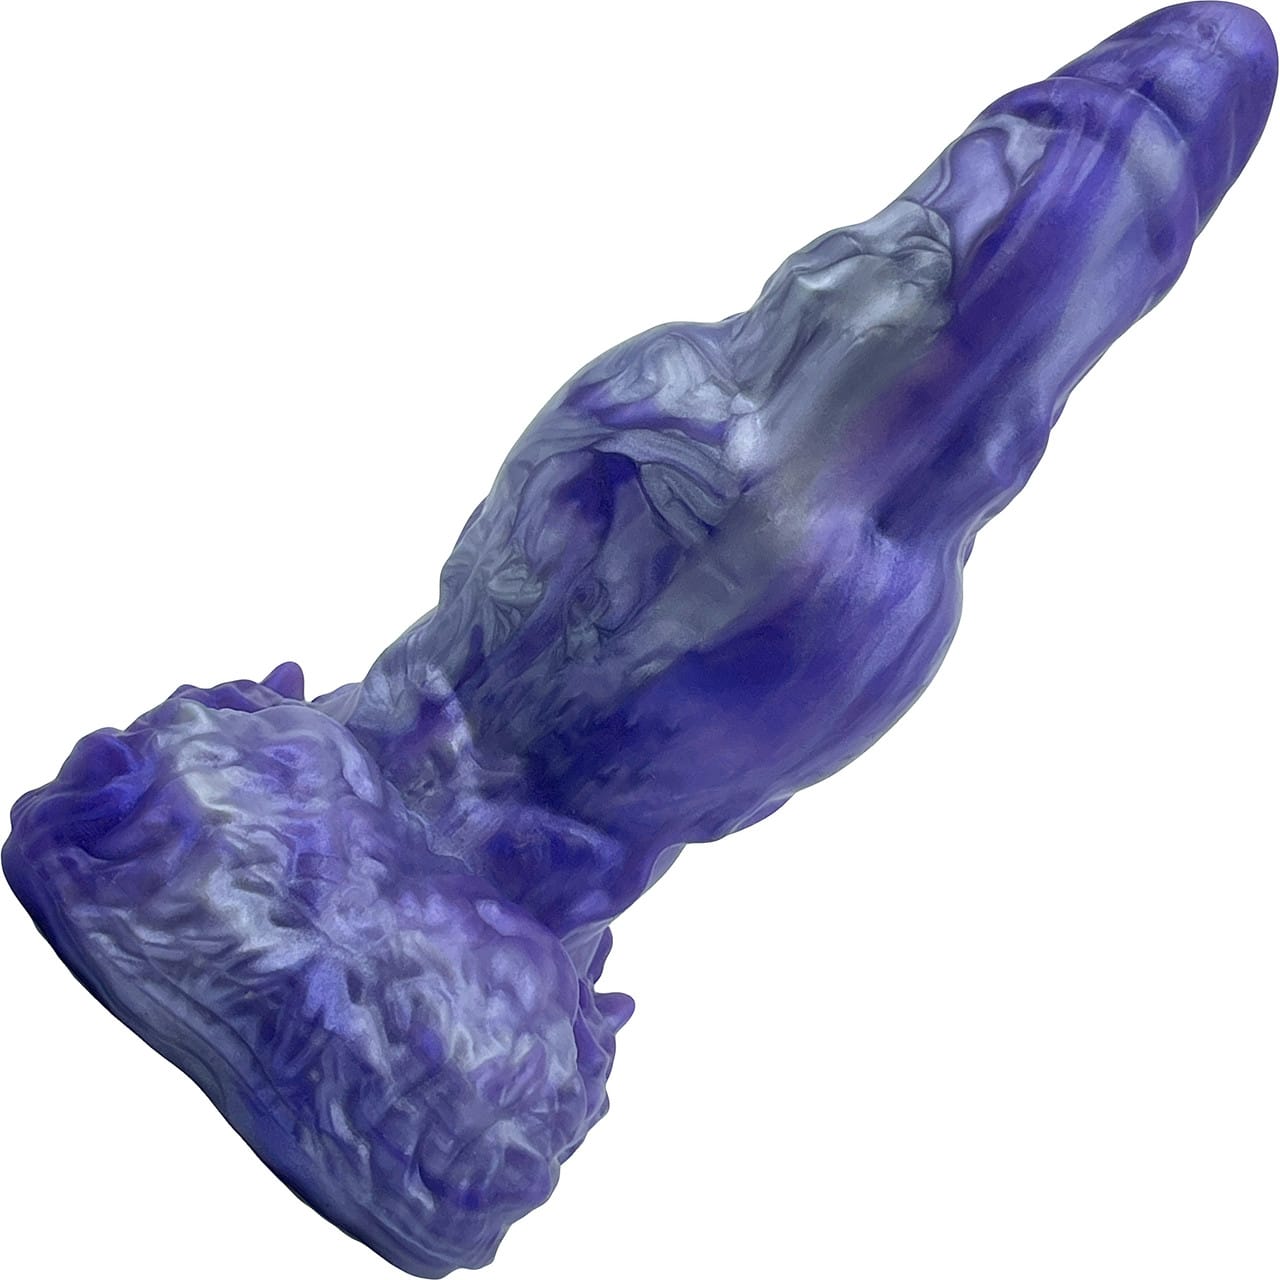 Uncover Creations The Werewolf Dog Dildo. Slide 10